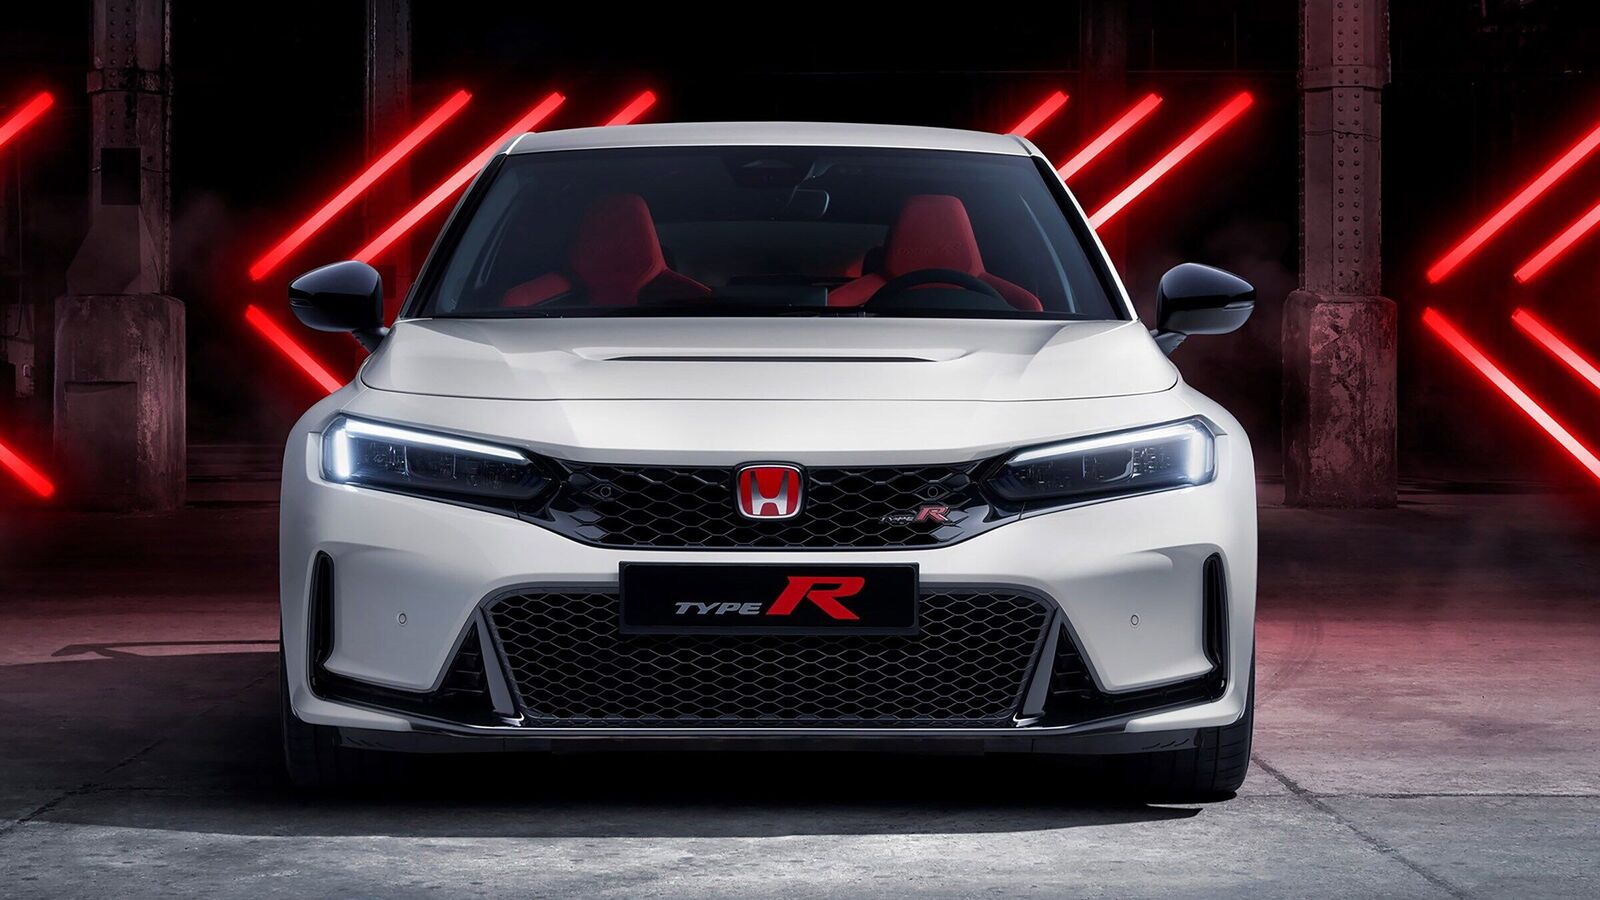 In pics: The most powerful Honda Civic Type R makes debut